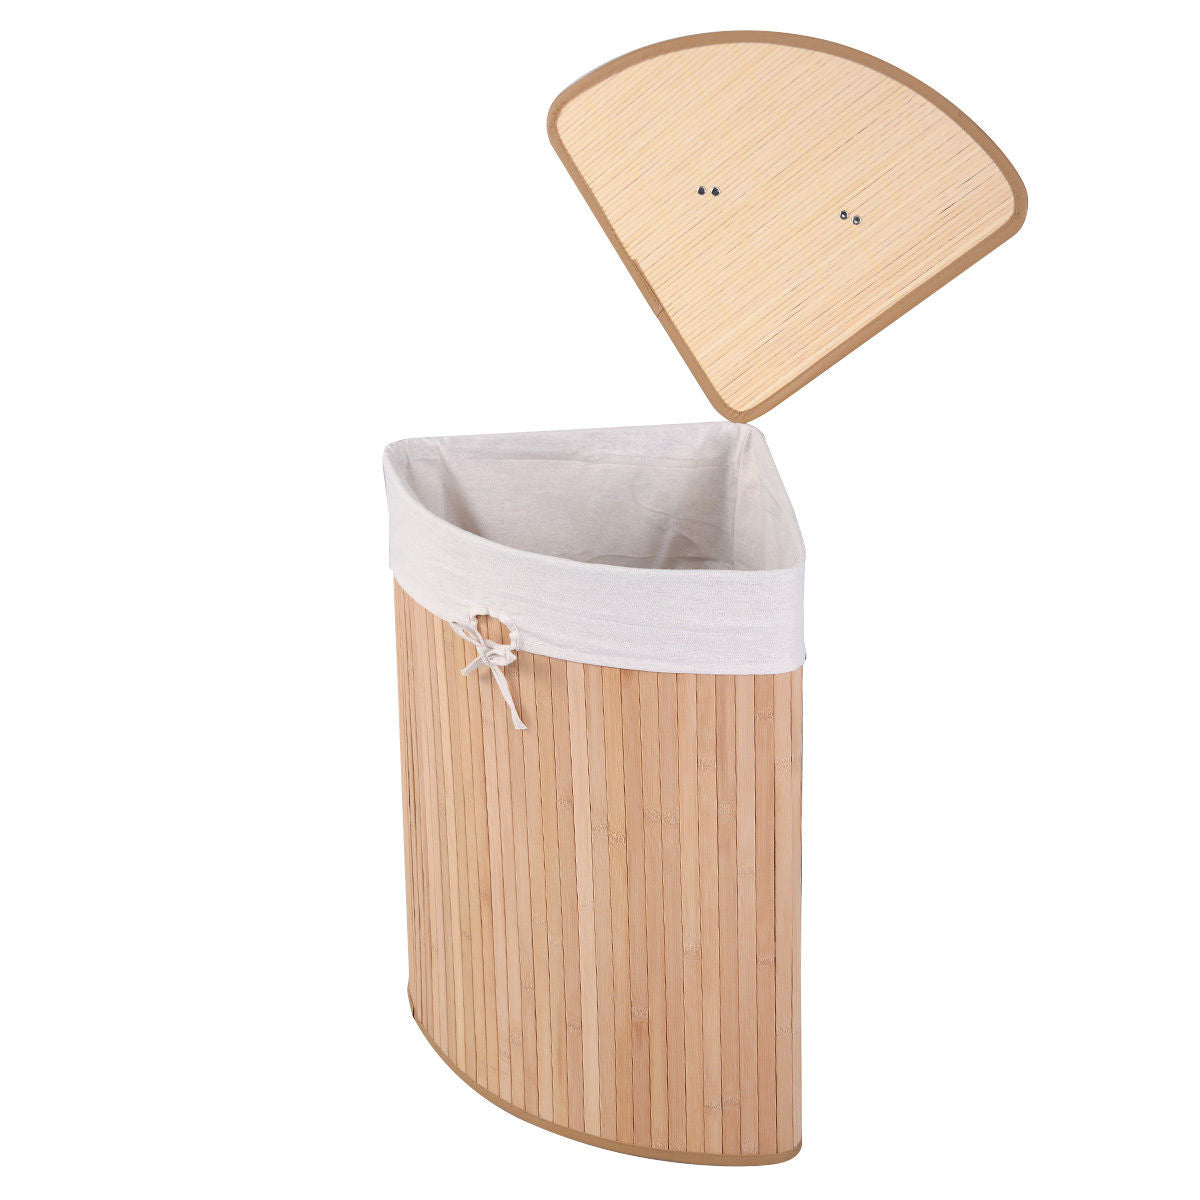 Corner Bamboo Hamper Laundry Basket - Direct by Wilsons Home Store